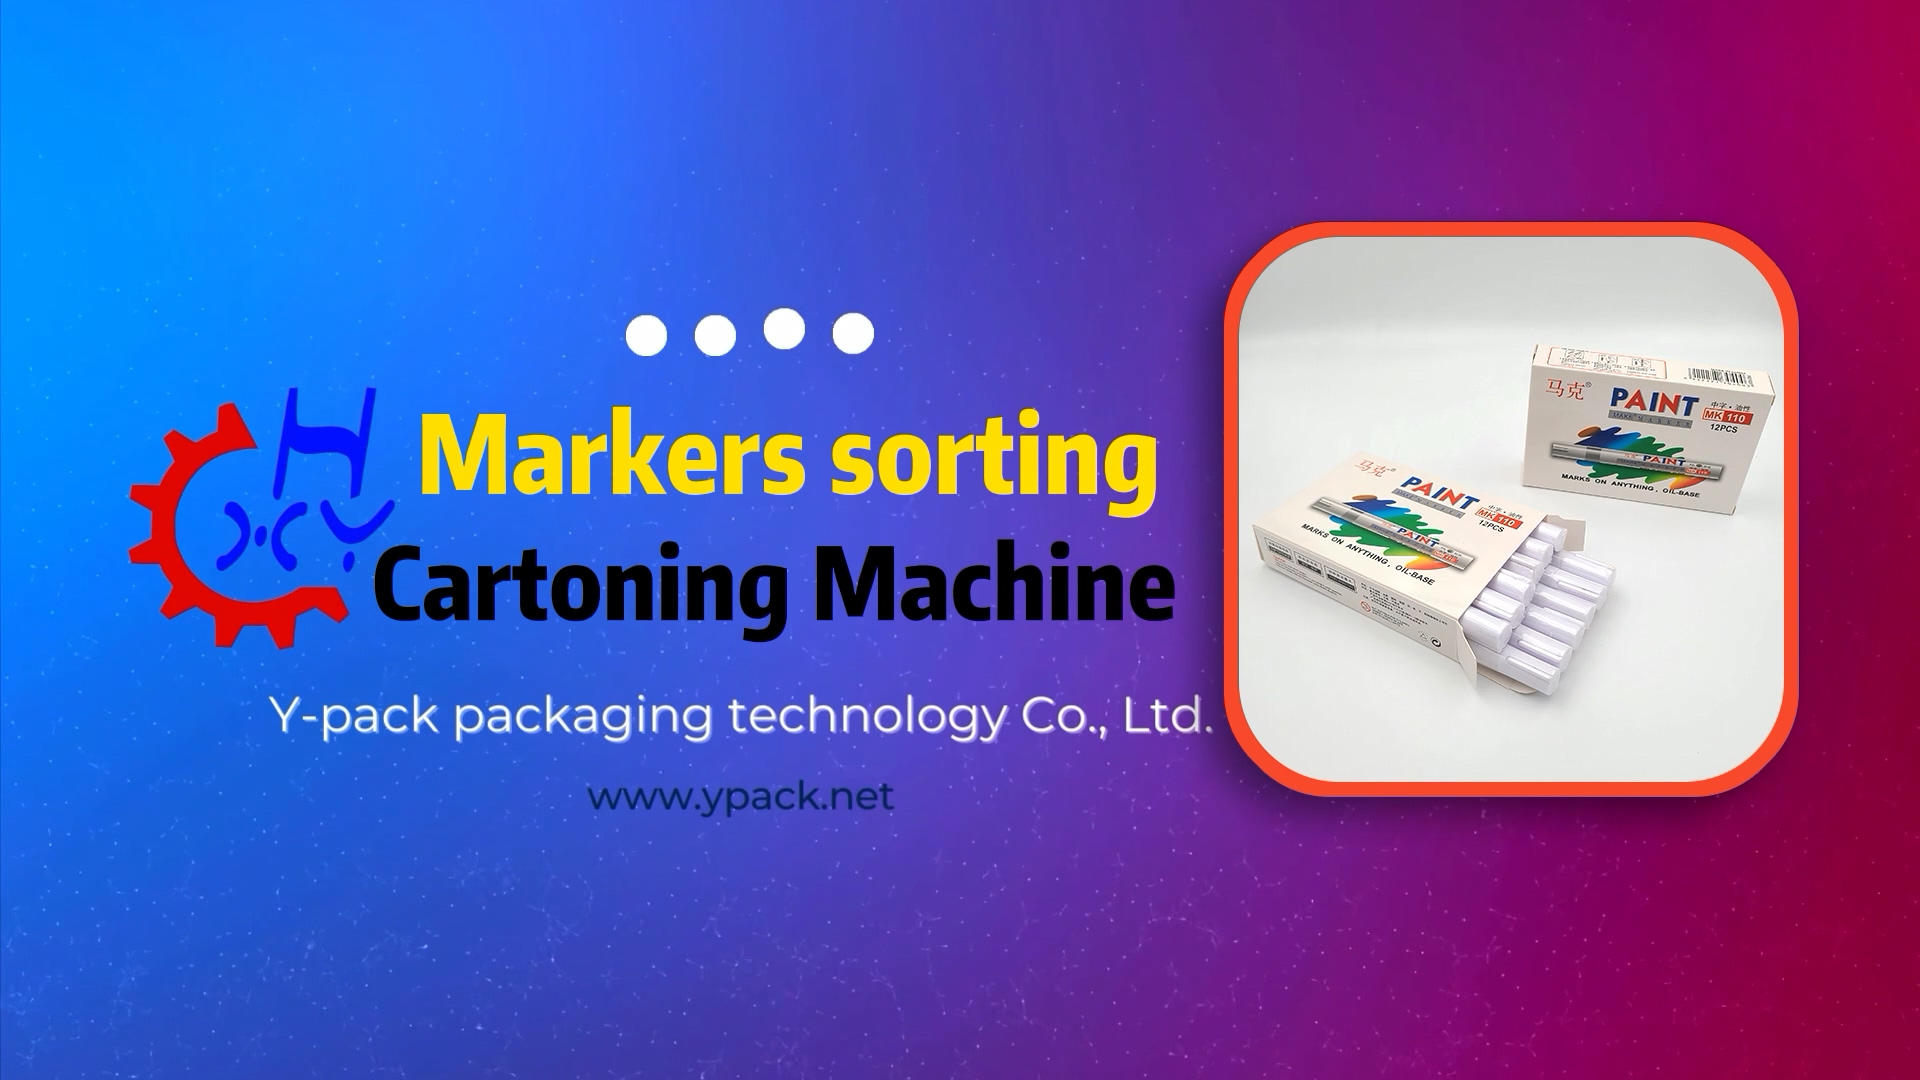 How to Pack Whiteboard Markers into Box? Markers Sorting and Cartoning Machine